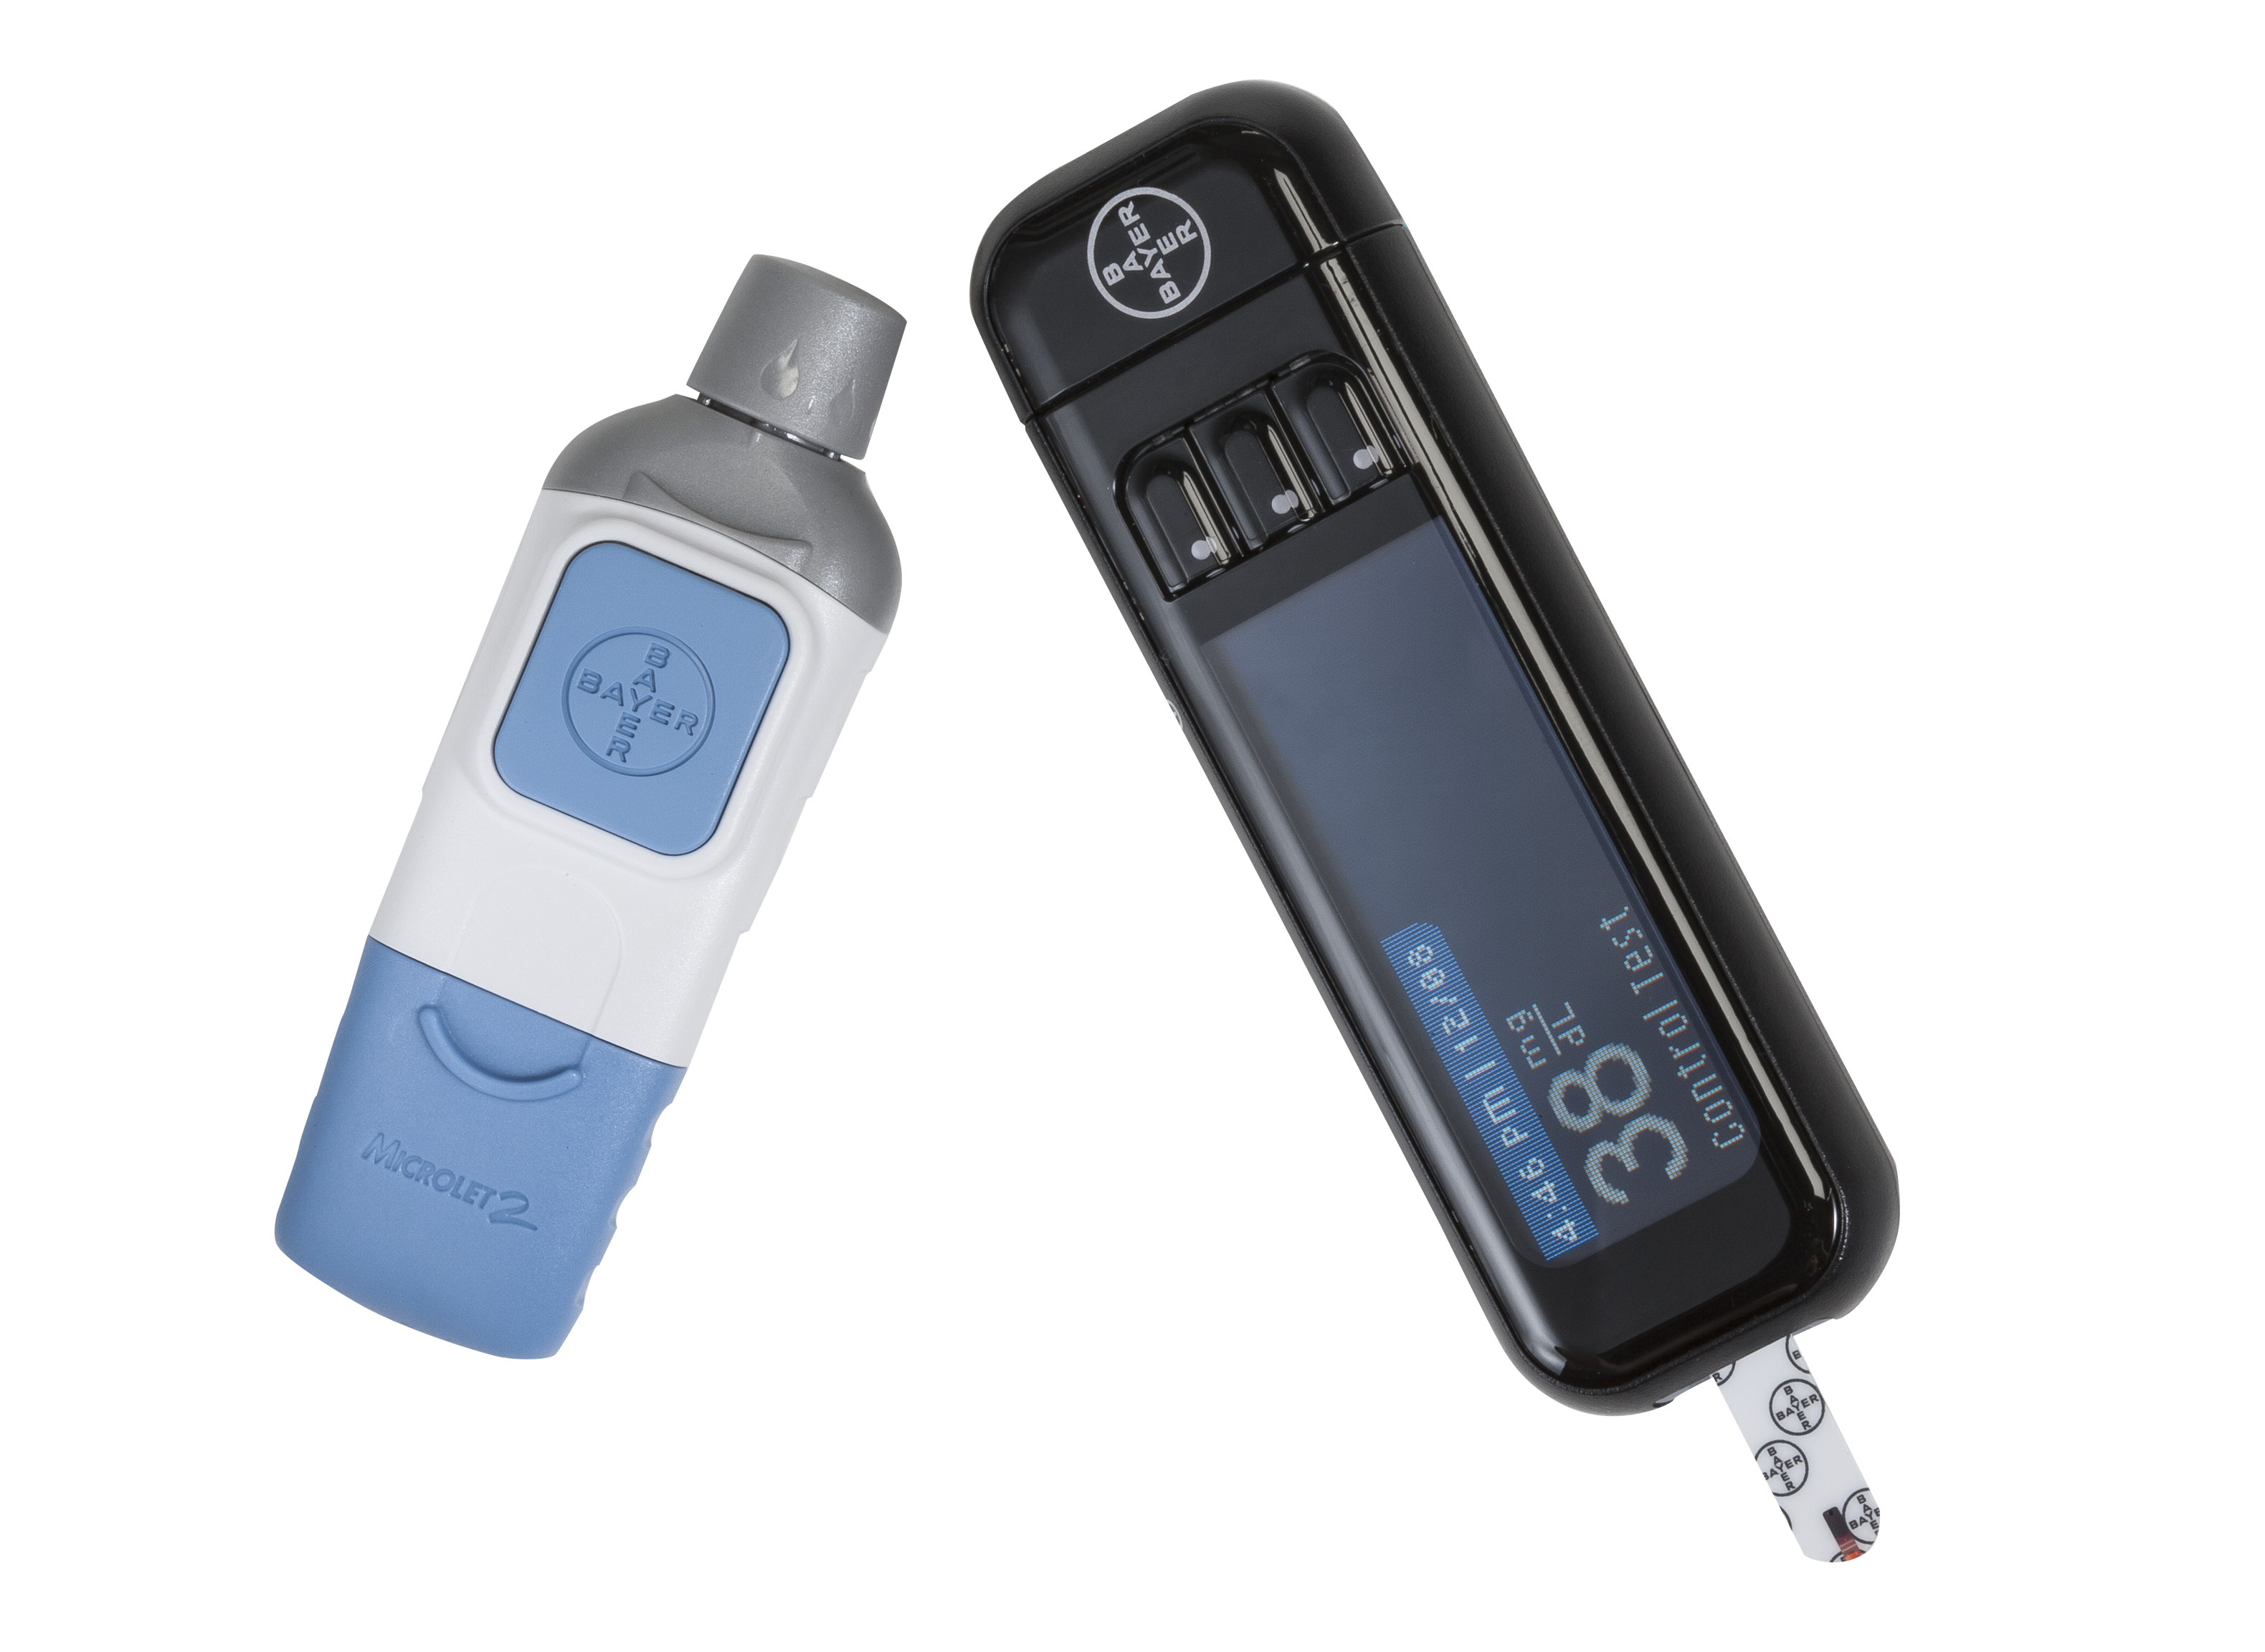 kleermaker vonnis Monet Bayer Contour Next USB Blood Glucose Meter Review - Consumer Reports